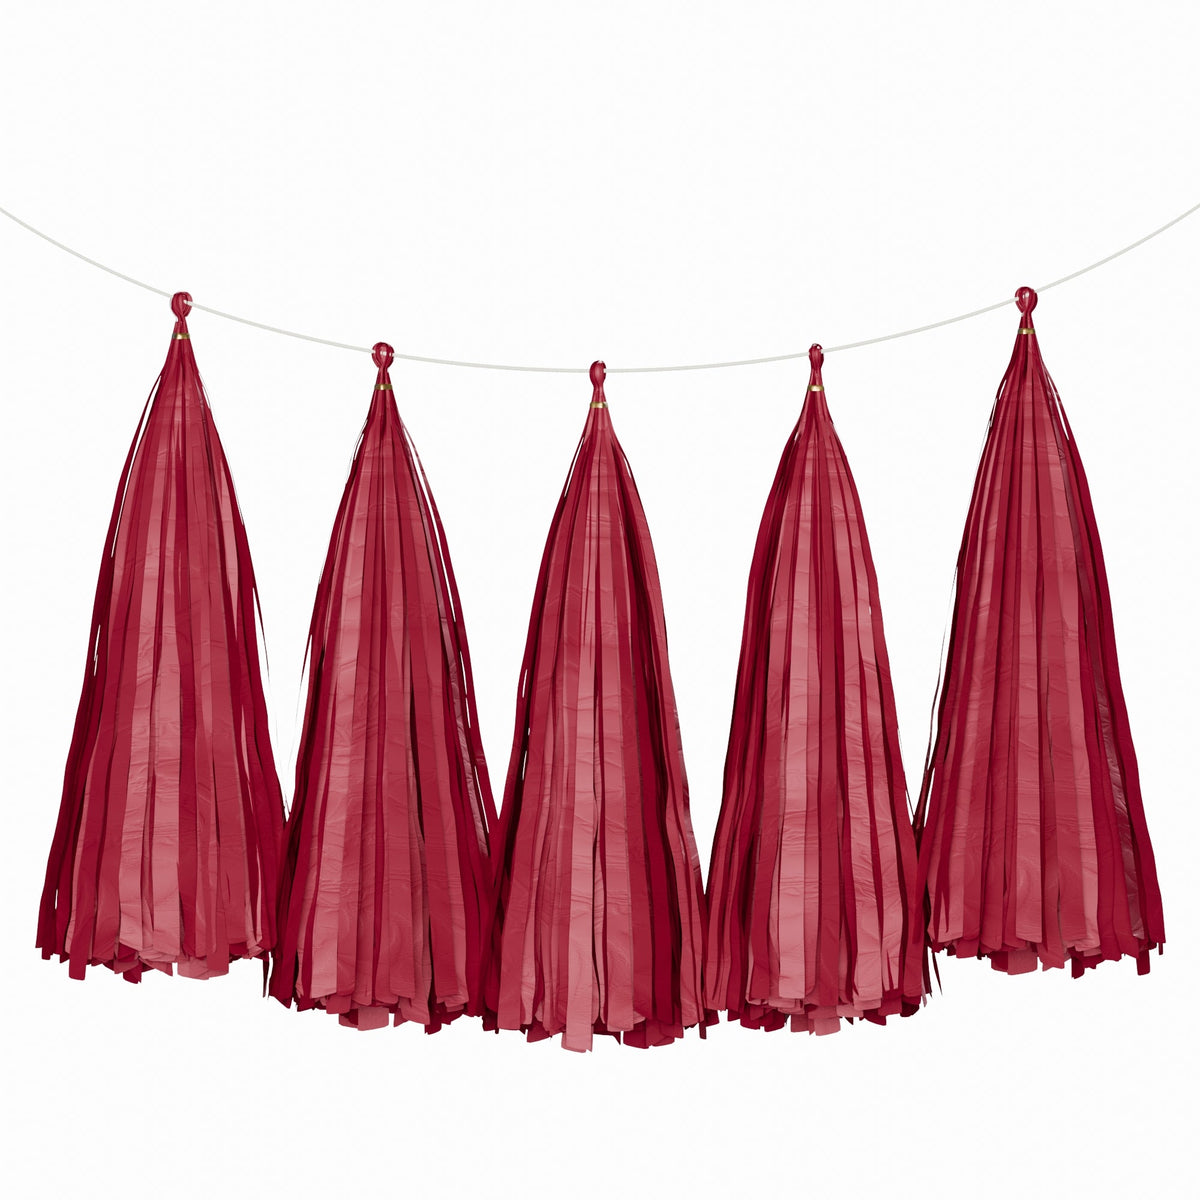 Weifang Mayshine Imp&exp co Decorations Burgundy Tassel Garland, 5 Count 810064197093